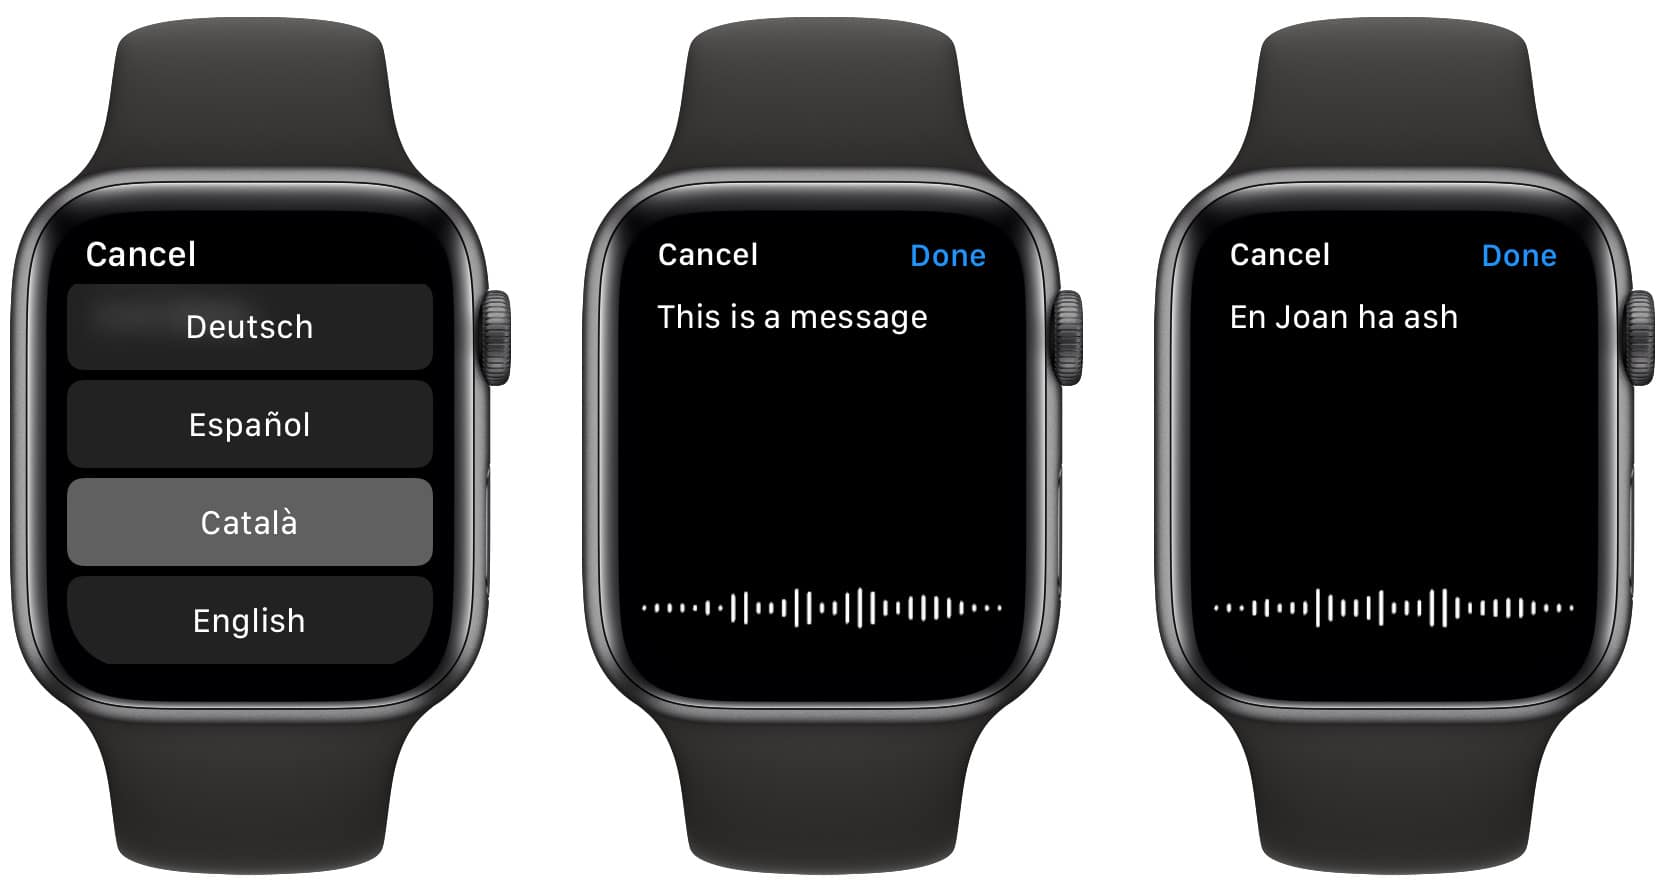 Long-press the Apple Watch dictation screen to get this language-selection menu. 